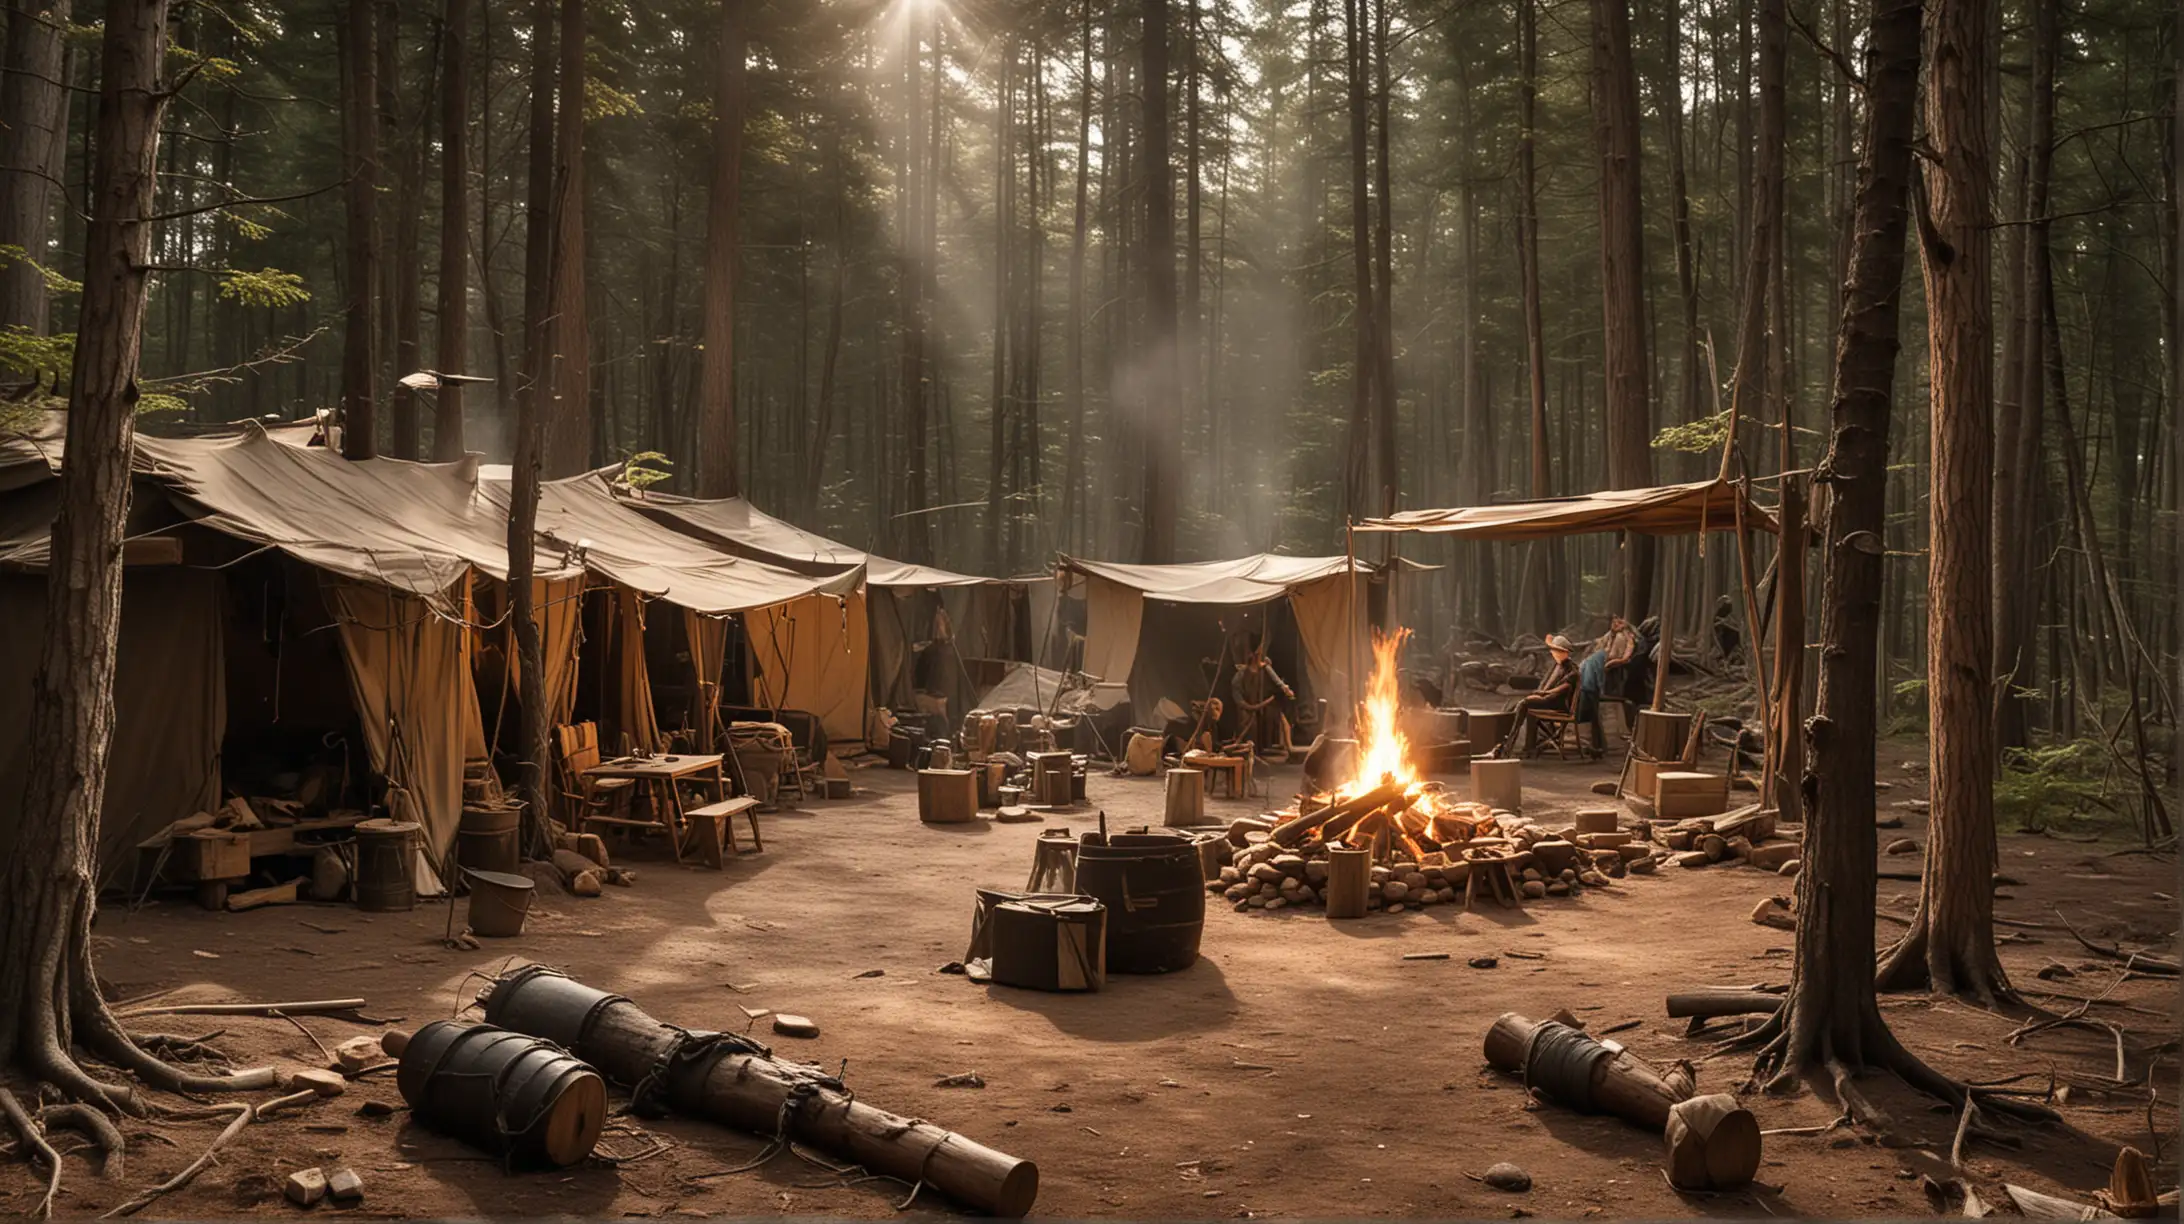 Sunlight filtered through the spaces in the newly built wooden wall, casting light on the busy scene within Eldoria's first outpost, Havenwood. Positioned near the Whispering Falls, it was a simple setup, more of a fortified camp than a city. Tents were gathered around a central fire pit, with smoke spiraling upwards. Pathfinders, clad in leather, were busy sharpening tools, repairing clothing, and sharing tales of their challenging journey.